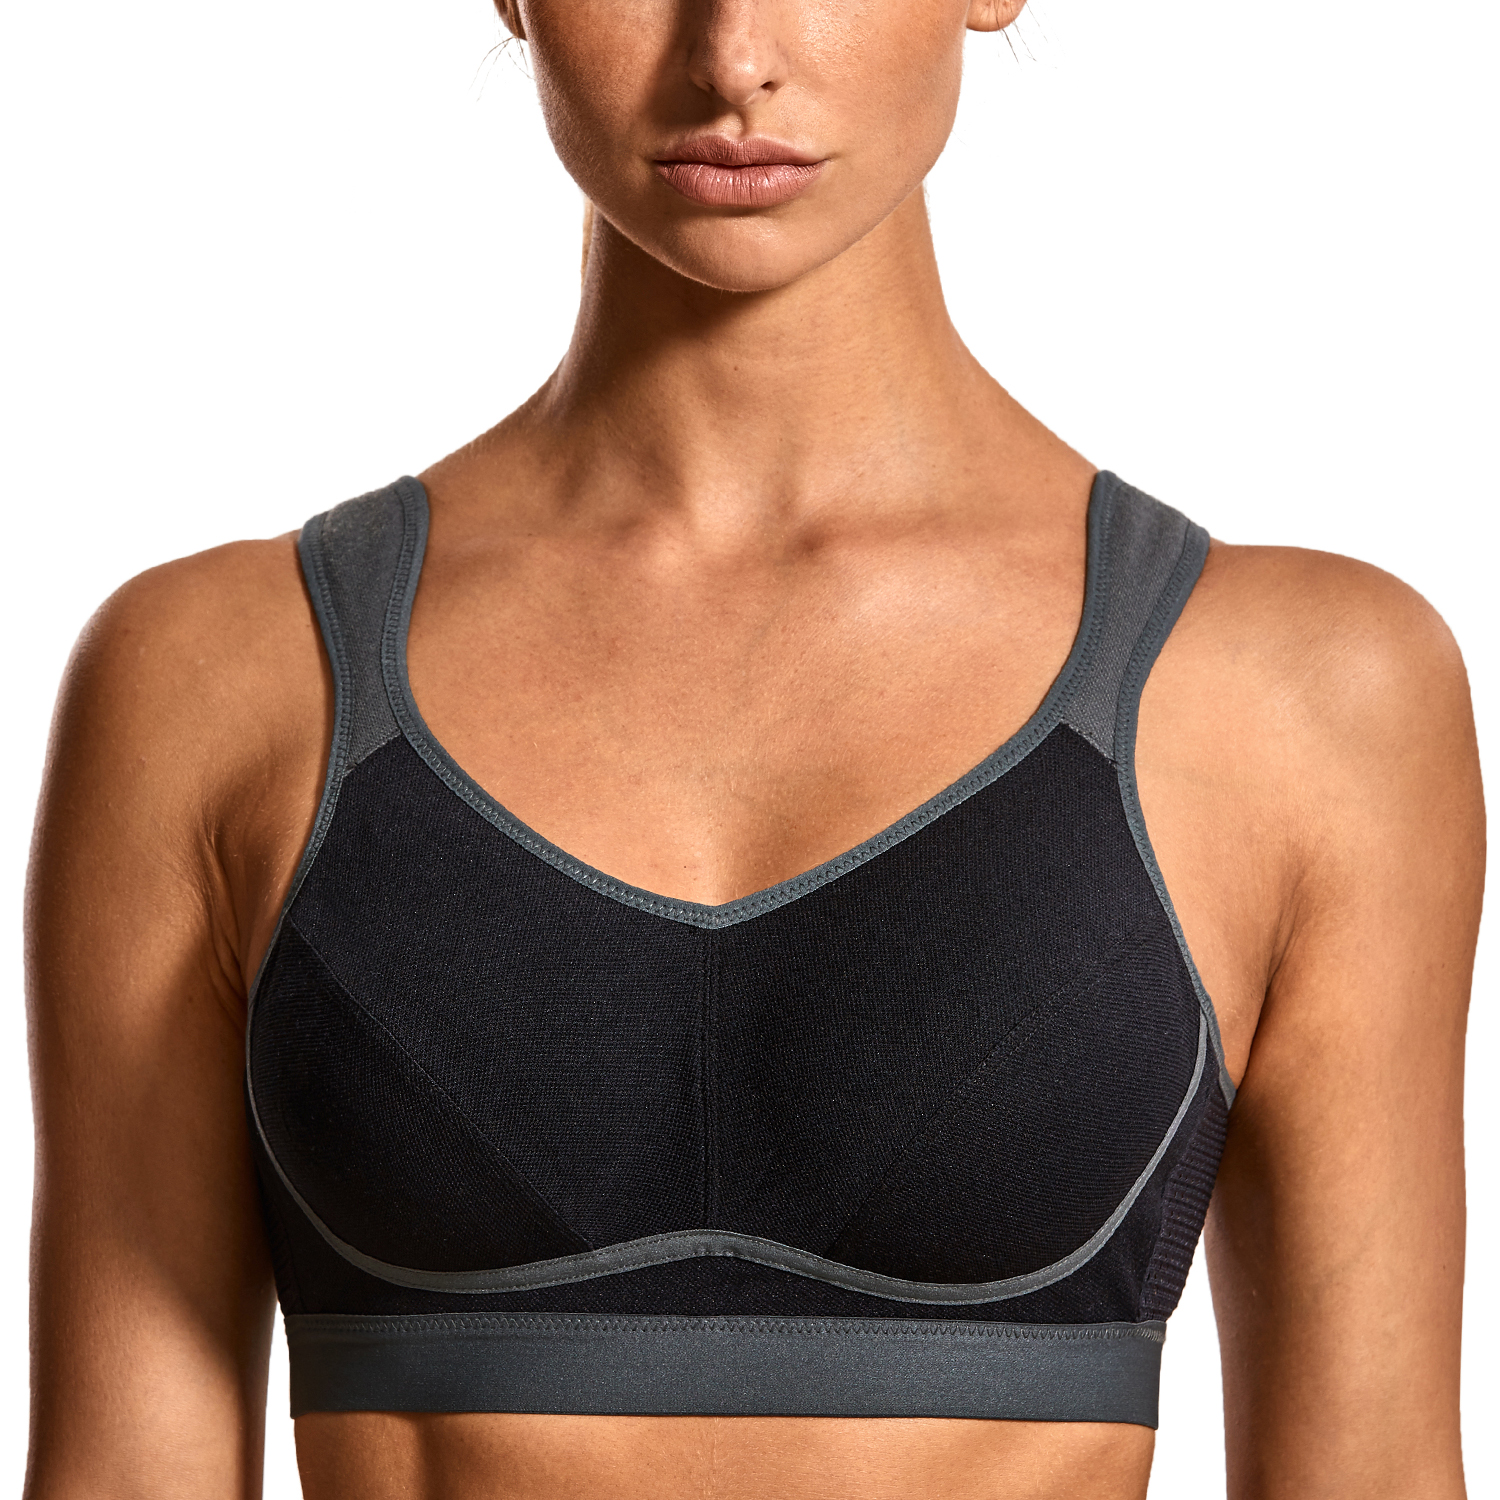 SYROKAN Women's High Impact Sports Bra Support Bounce Control Plus Size  Workout